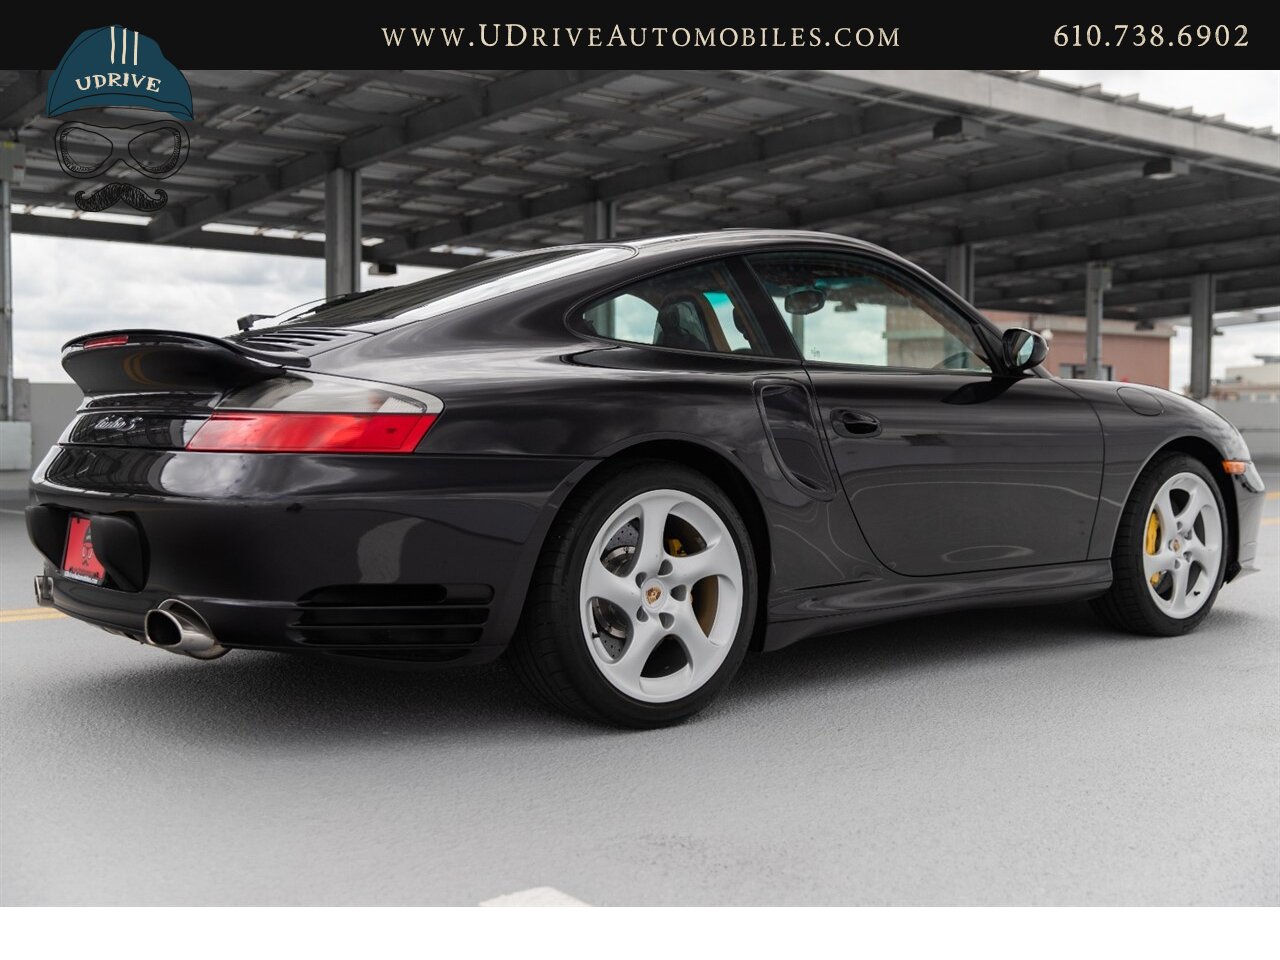 2005 Porsche 911 Turbo S 6 Speed 14k Miles Sport Sts Painted Backs  Natural Brown Lthr $144,070 MSRP - Photo 18 - West Chester, PA 19382